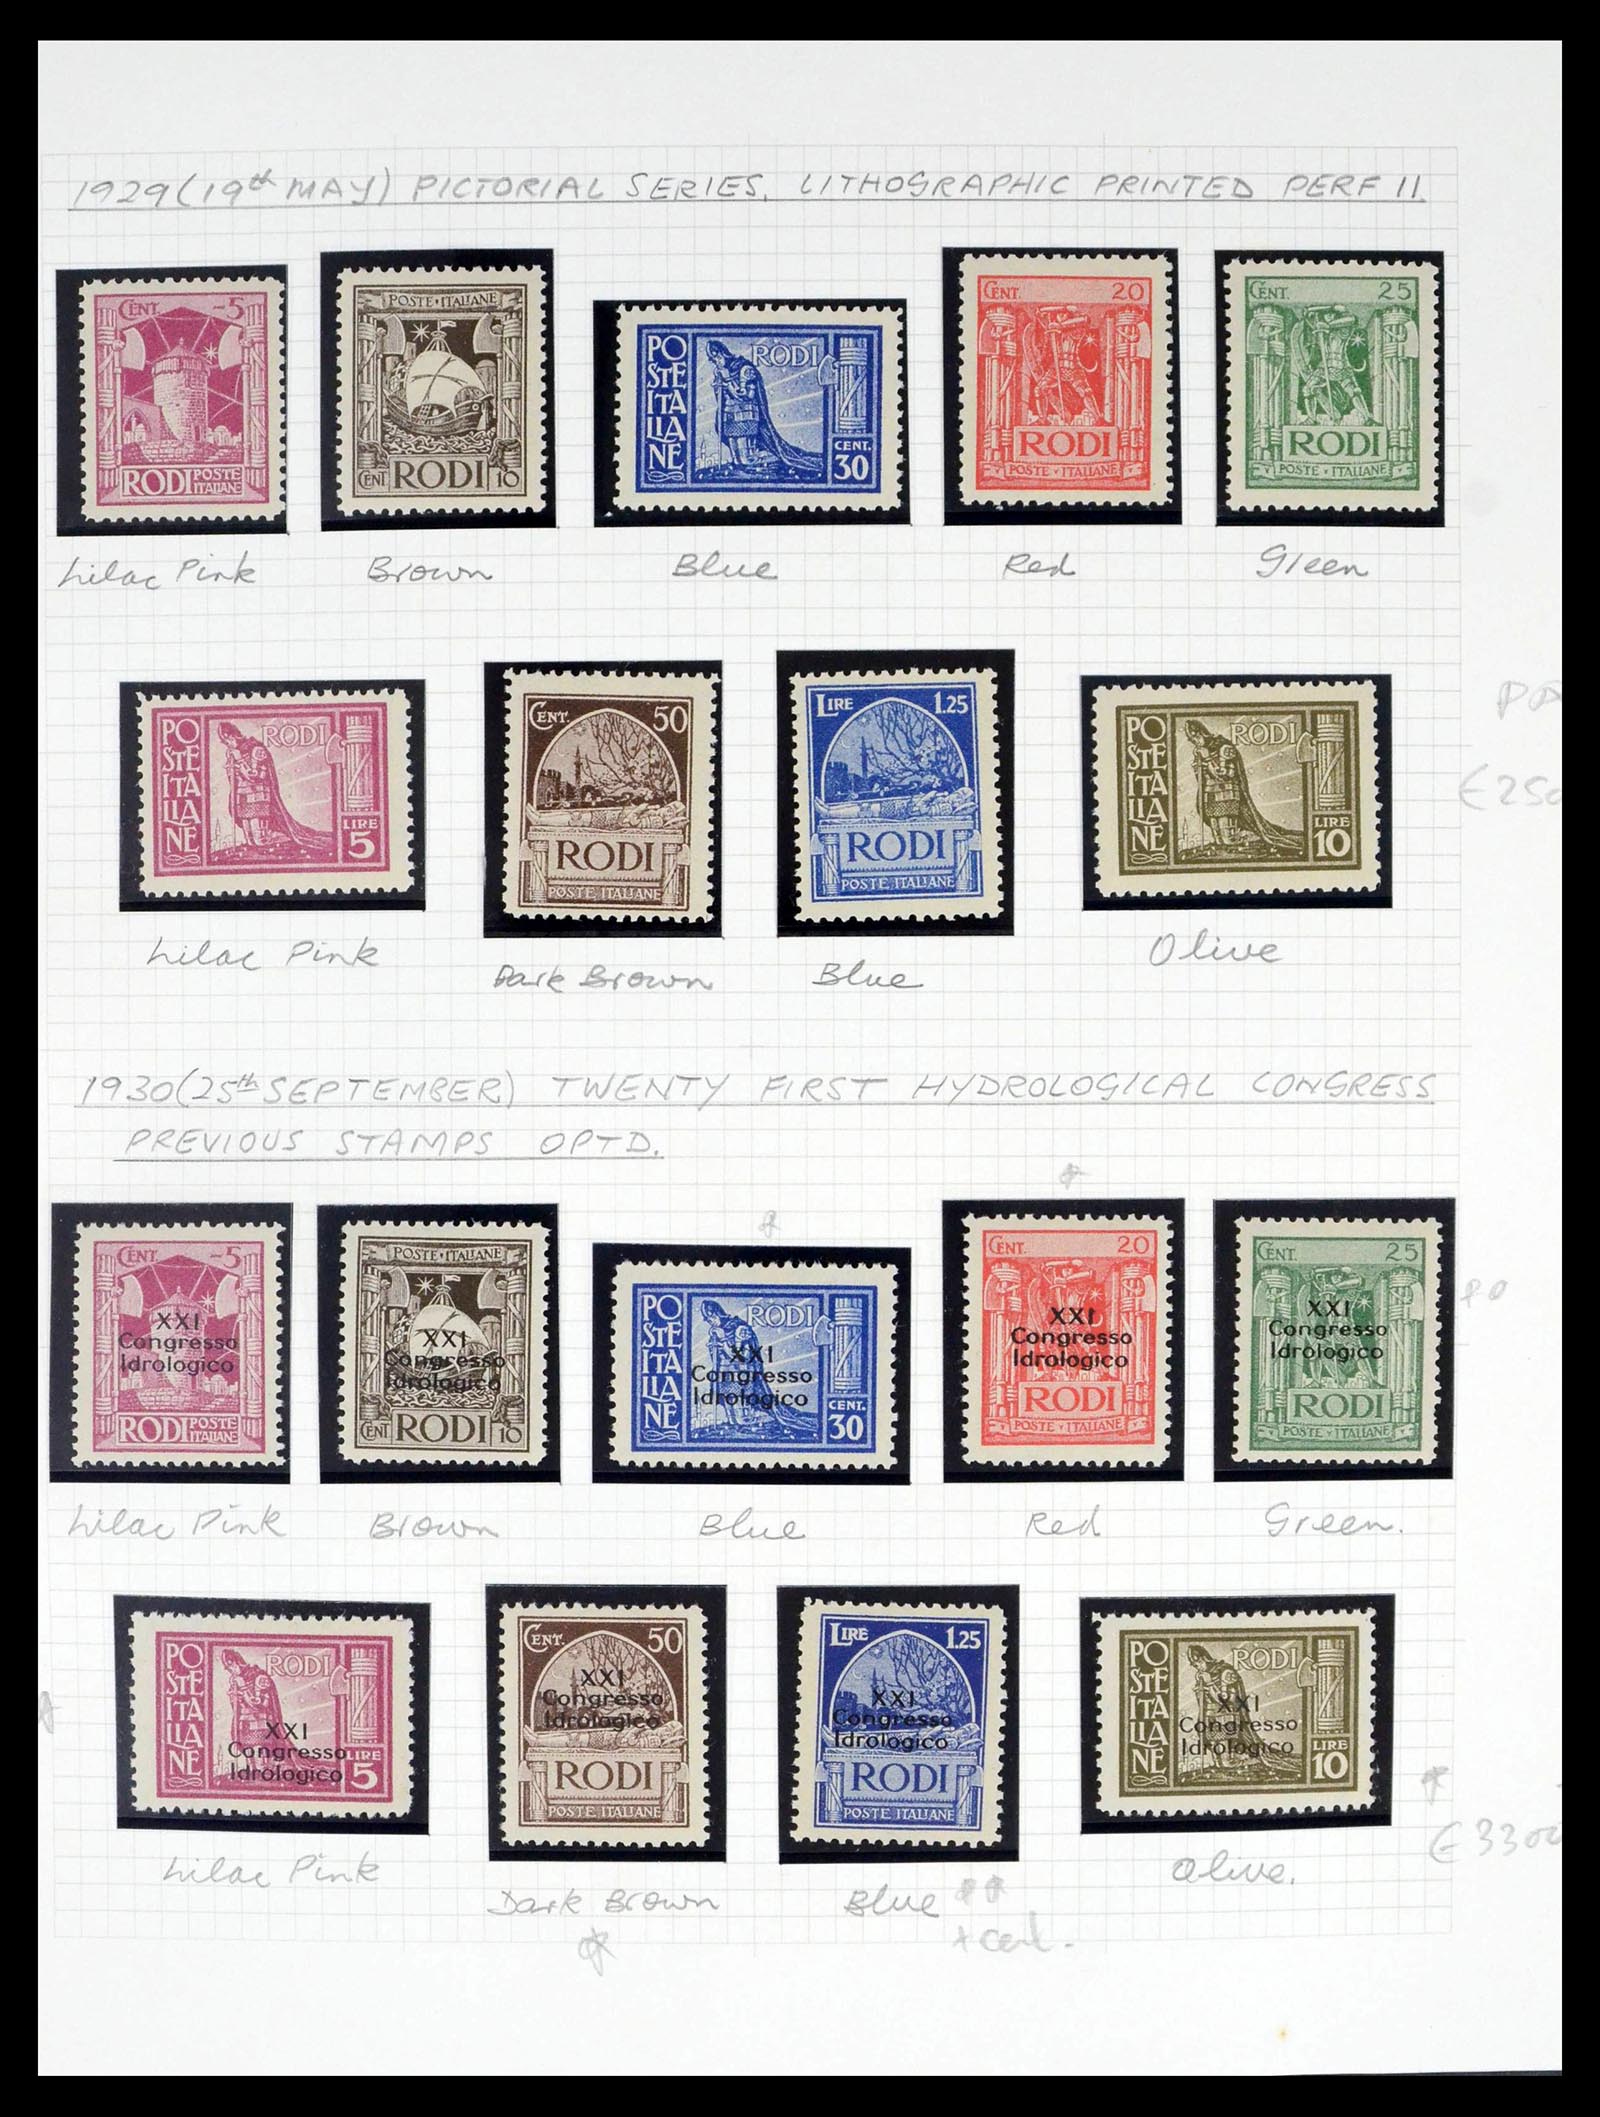 39064 0004 - Stamp collection 39064 Italian Aegean Islands complete 1912-1945.